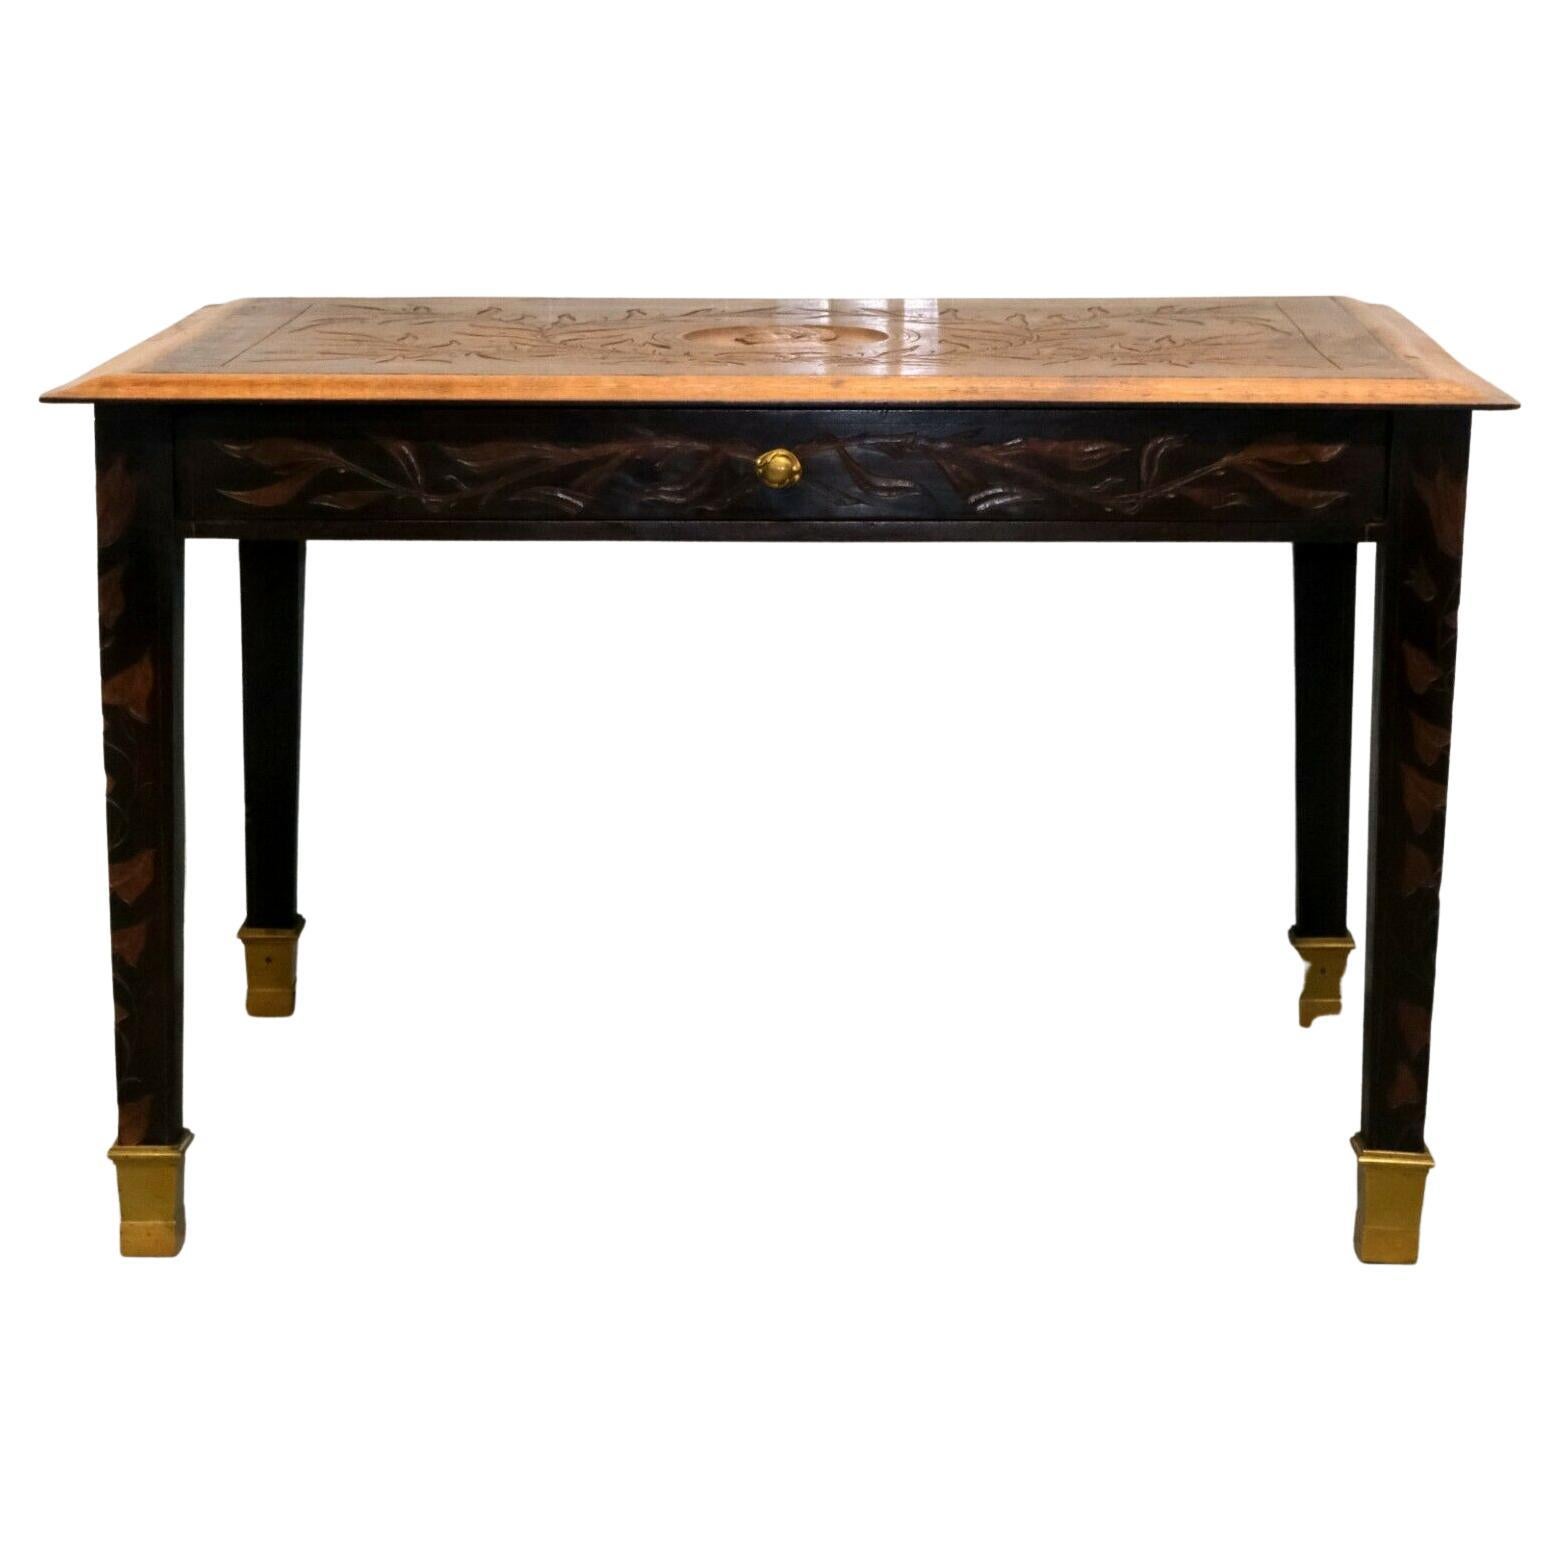 We are delighted to offer for sale this beautifully carved coffee table of Albert I king of Belgium with brass finished legs.

To talk a little bit about him, he was the king of the Belgiums between 1909/1934, who led the Belgian army during World